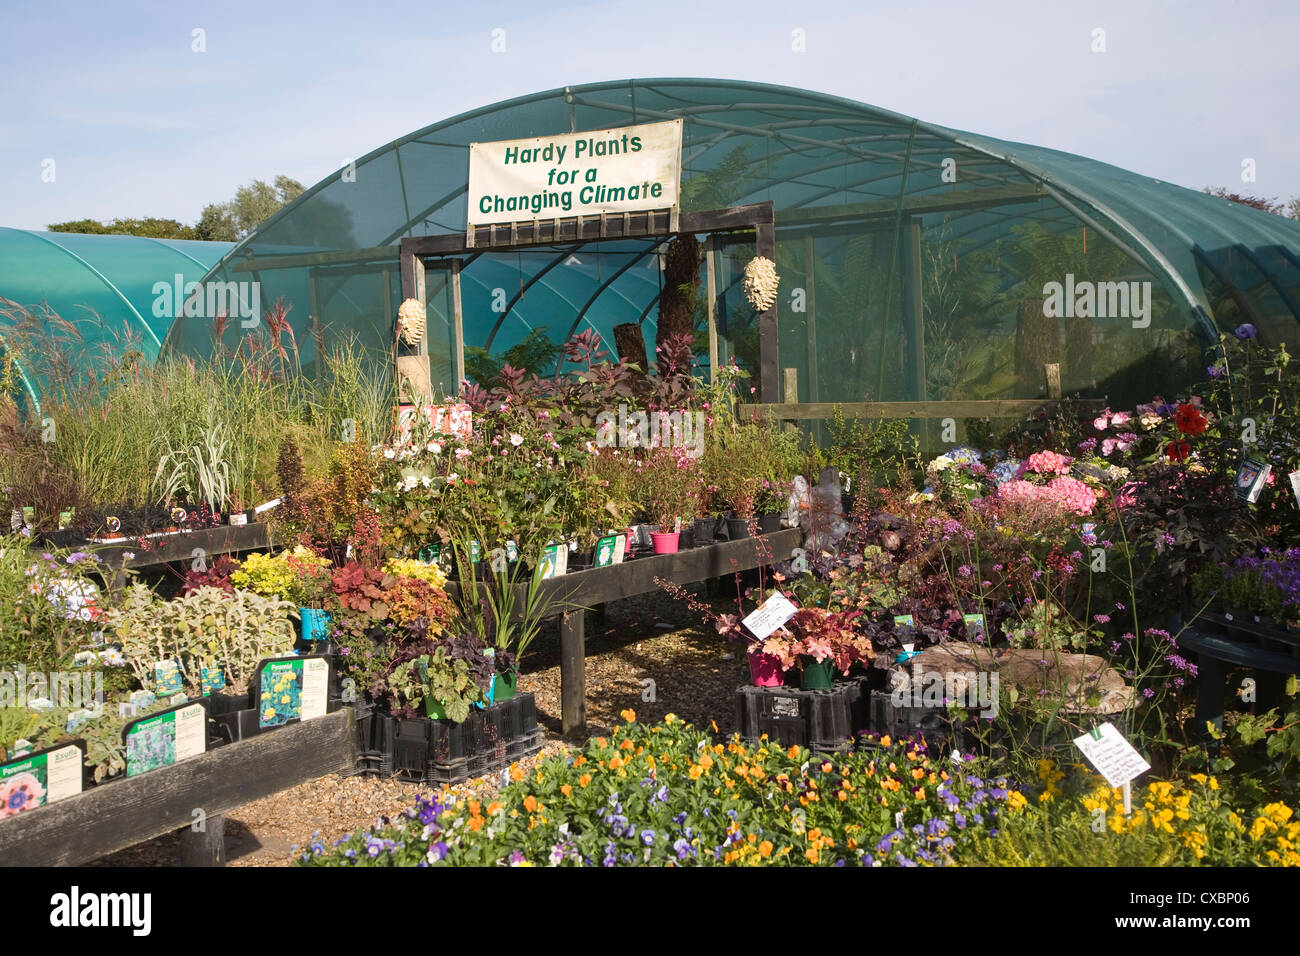 The Exotic Garden Company Hardy Plants for a Changing Climate nursery, Aldeburgh, Suffolk, England Stock Photo